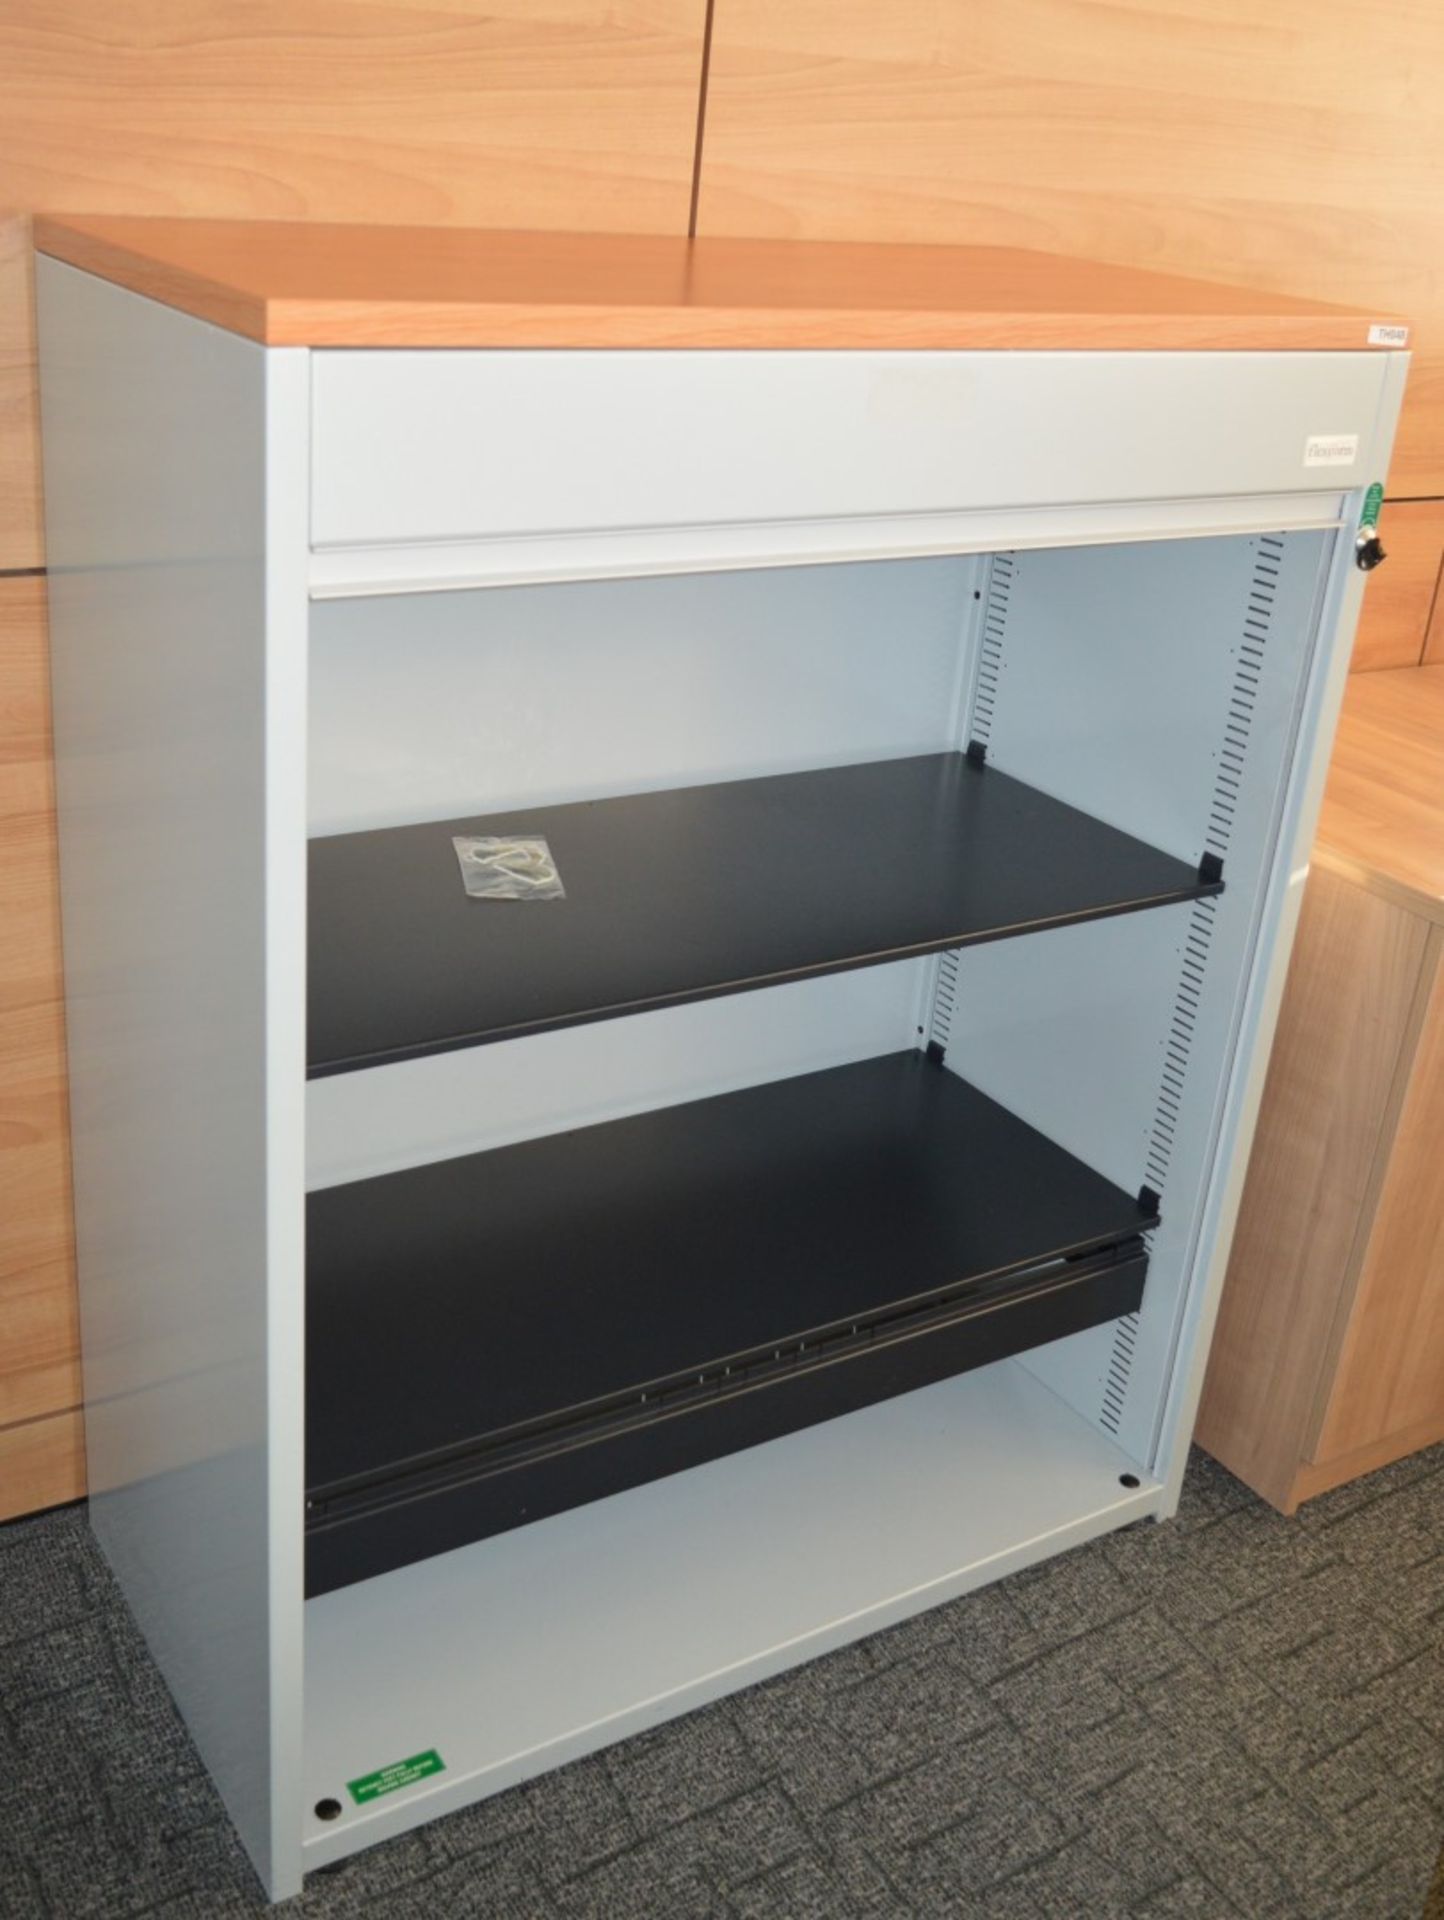 1 x Flexiform Tambour Door Office Storage Cabinet - Grey and Beech Finish - High Quality Office - Image 2 of 2